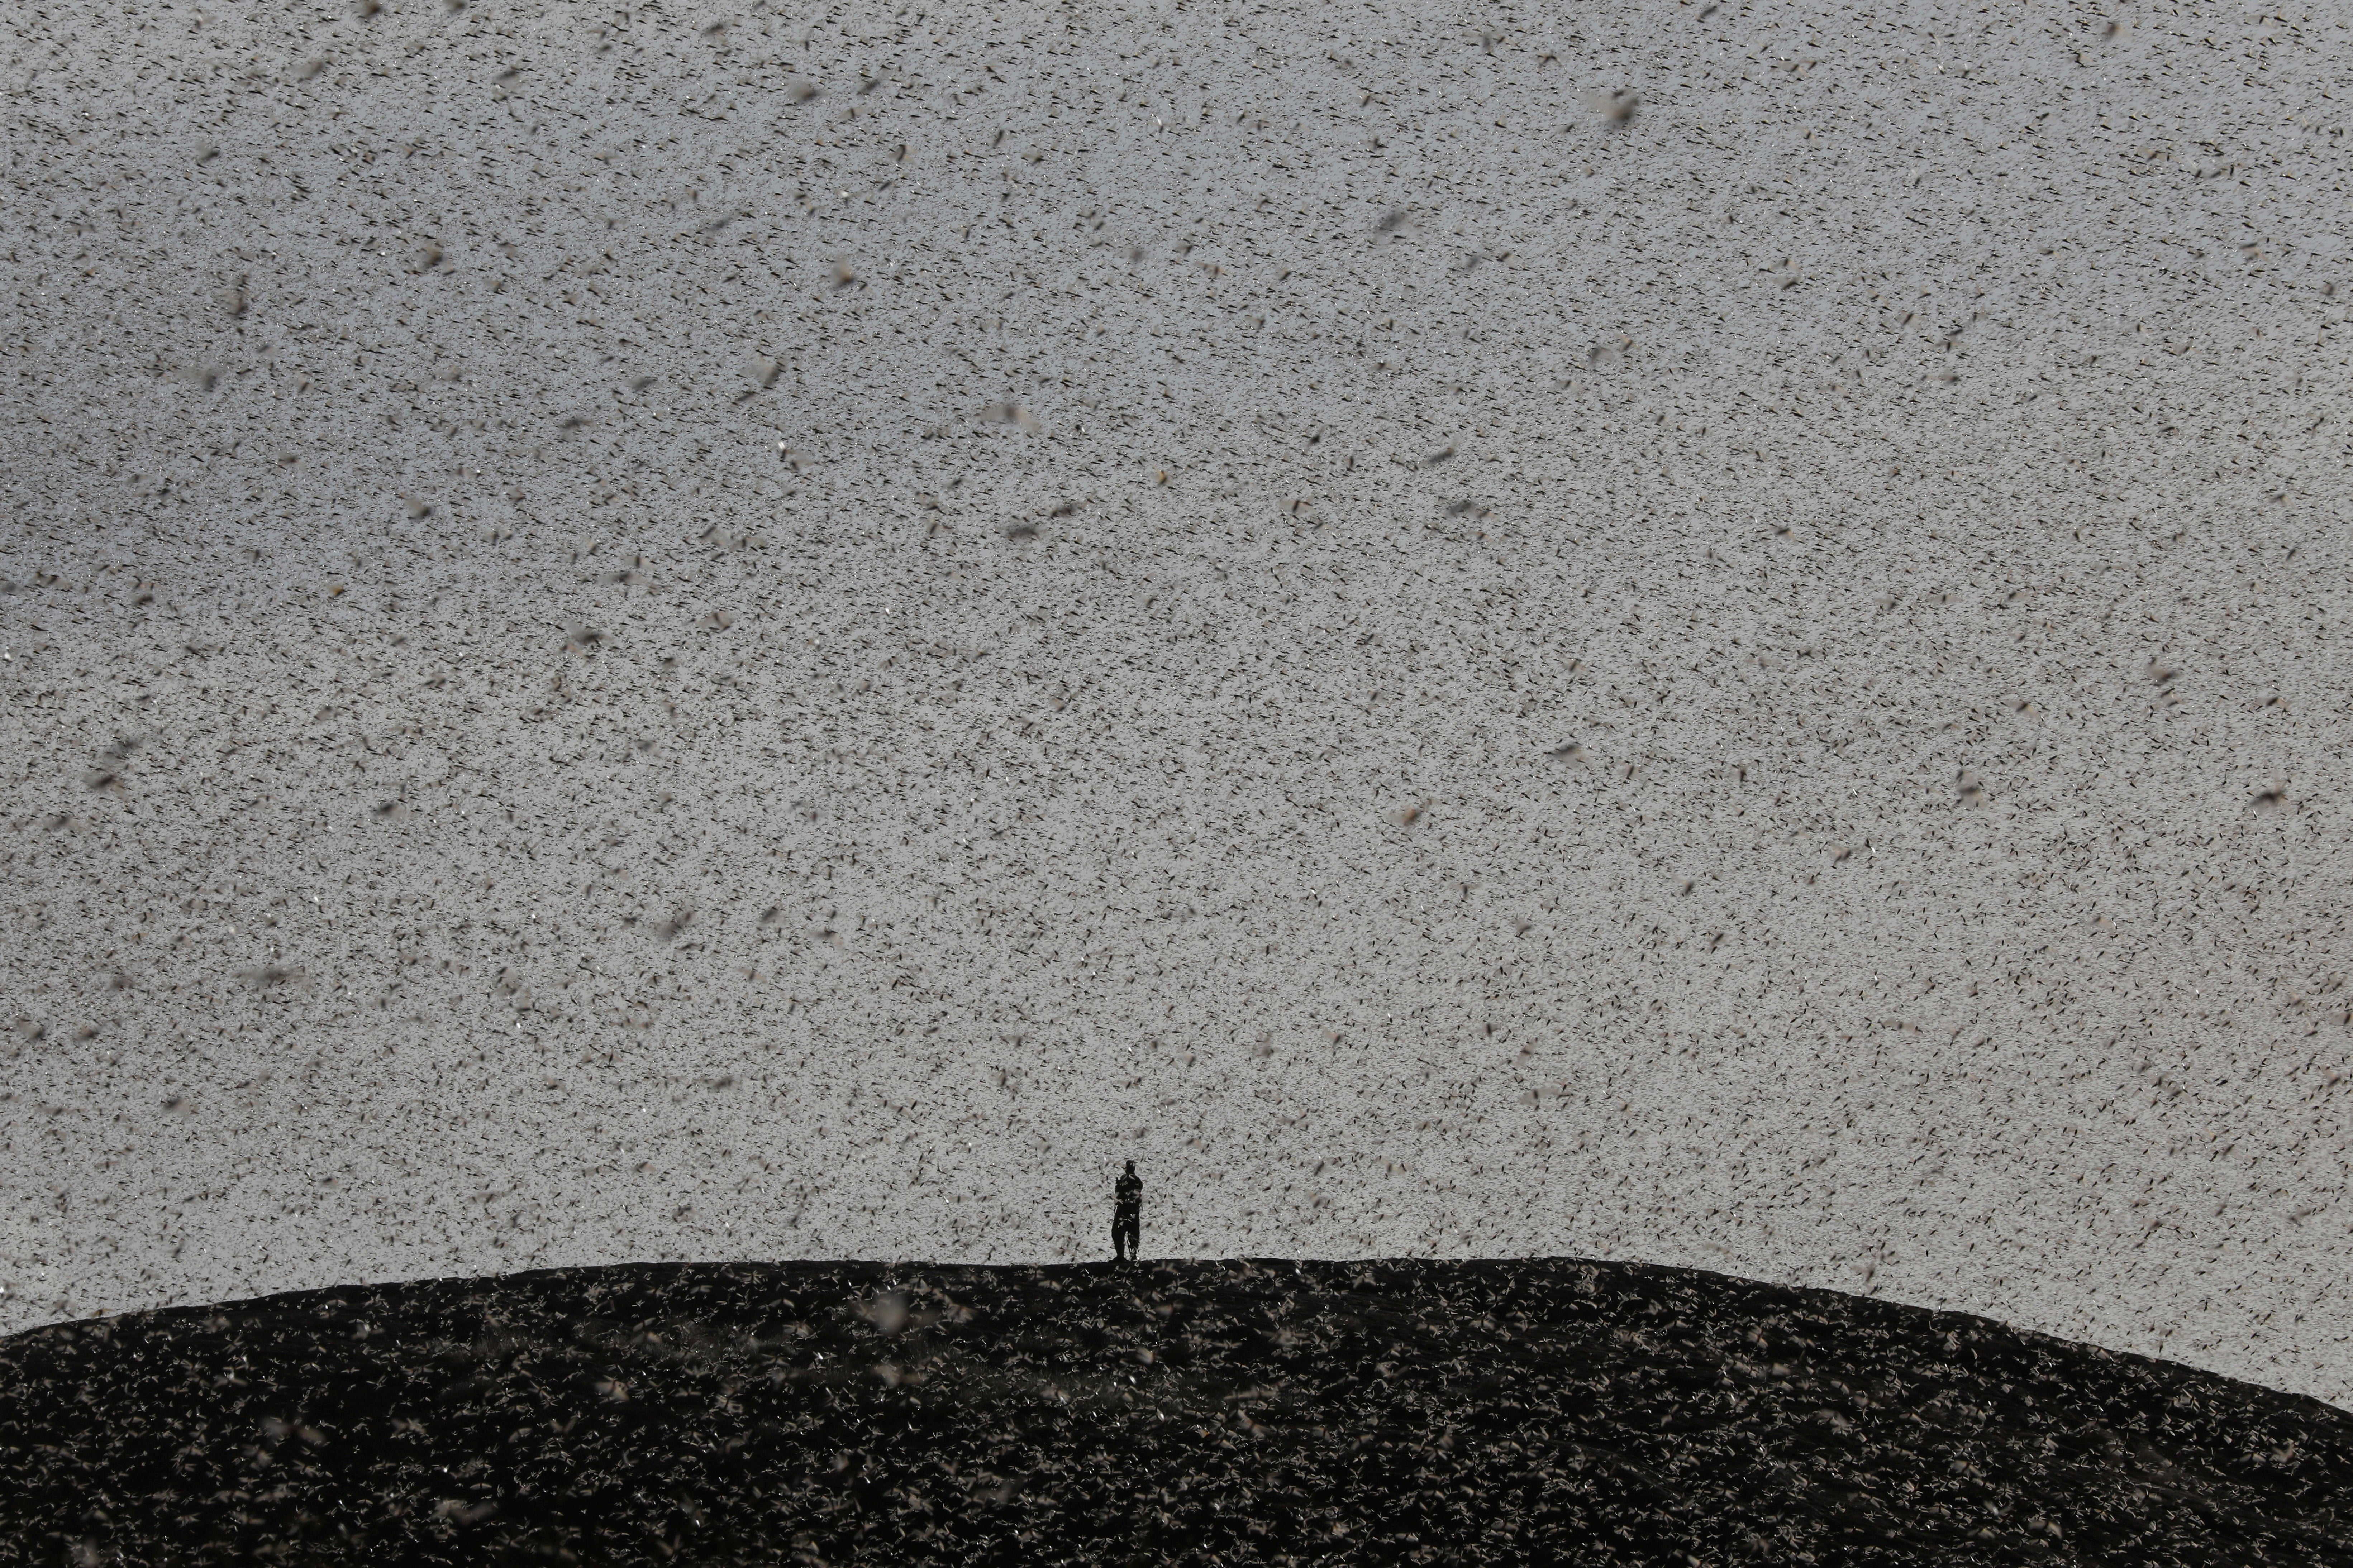 A man engulfed by a swarm of desert locusts, stands on top of a hill near Nanyuki, Kenya